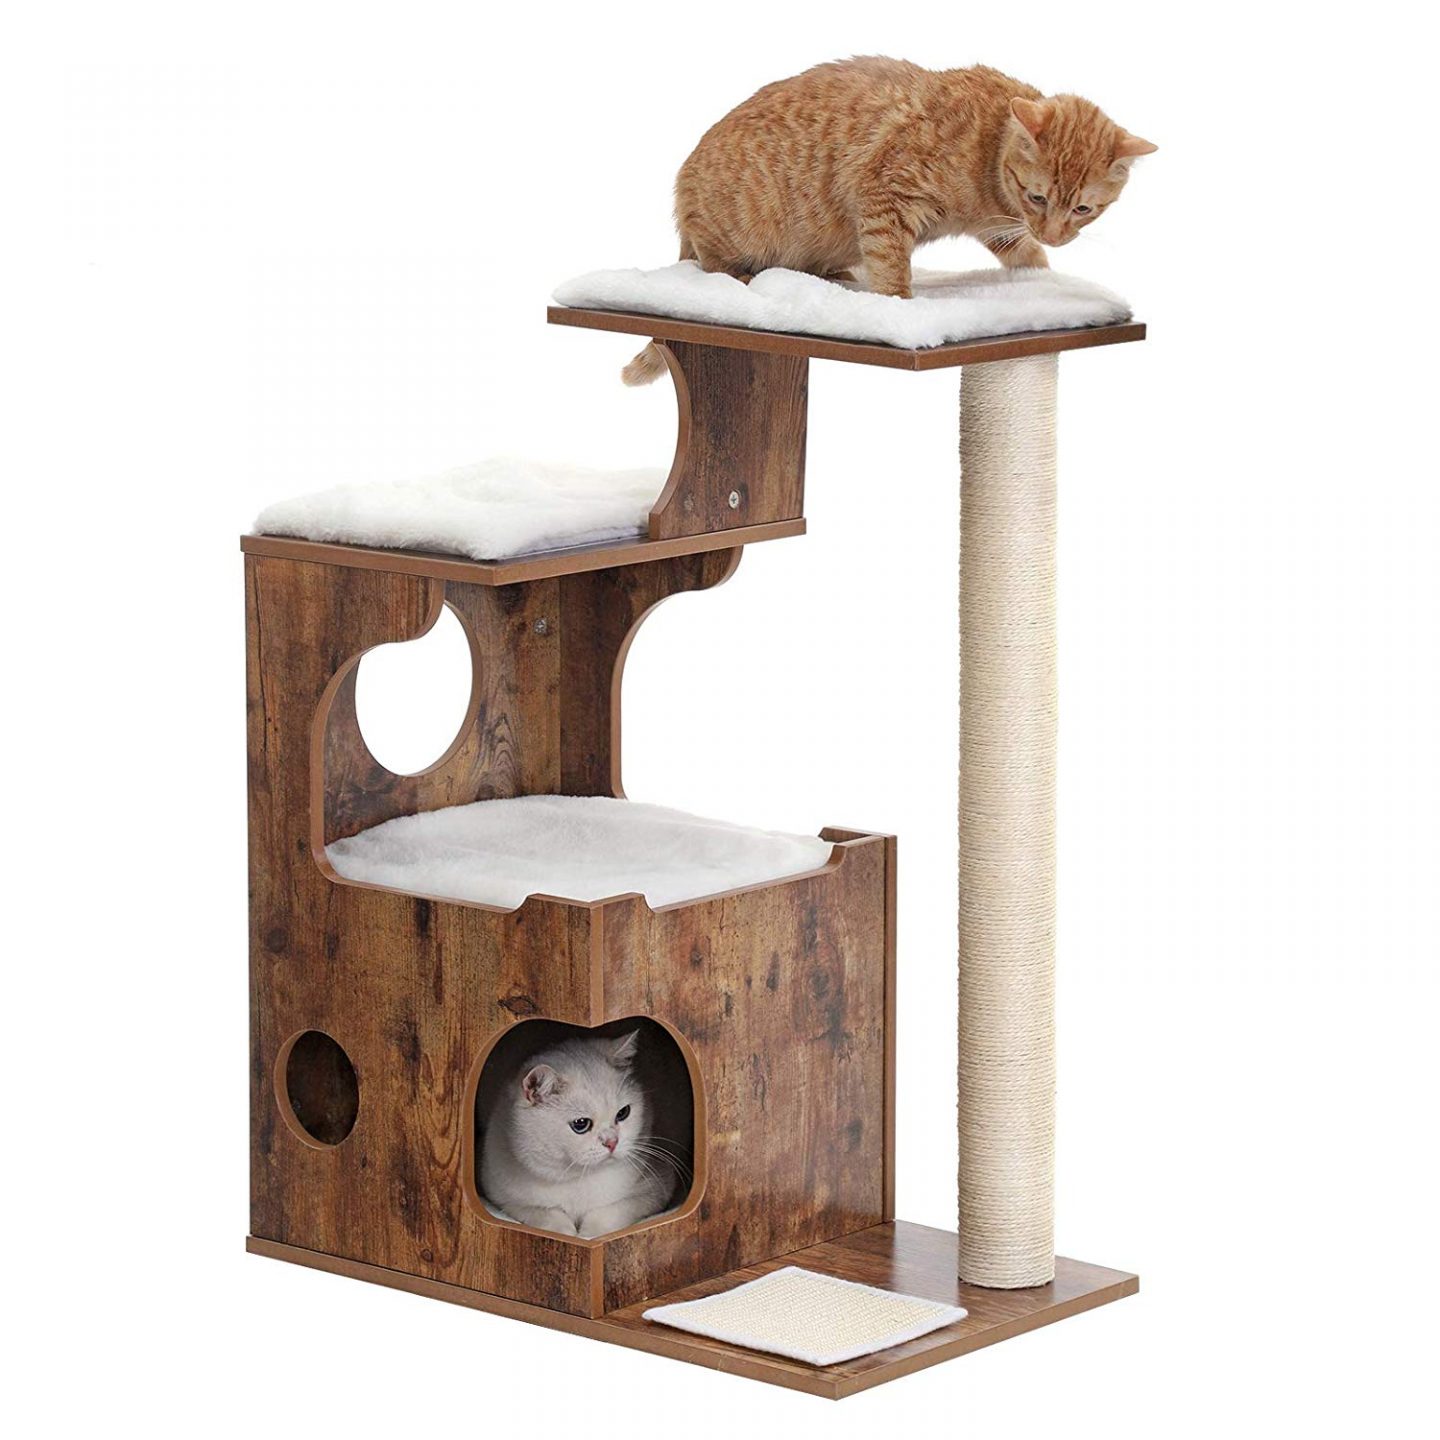 This cat tree has a large scratching post for your cat to stretch out on.  It's a great cat tree for senior cats and large cats.